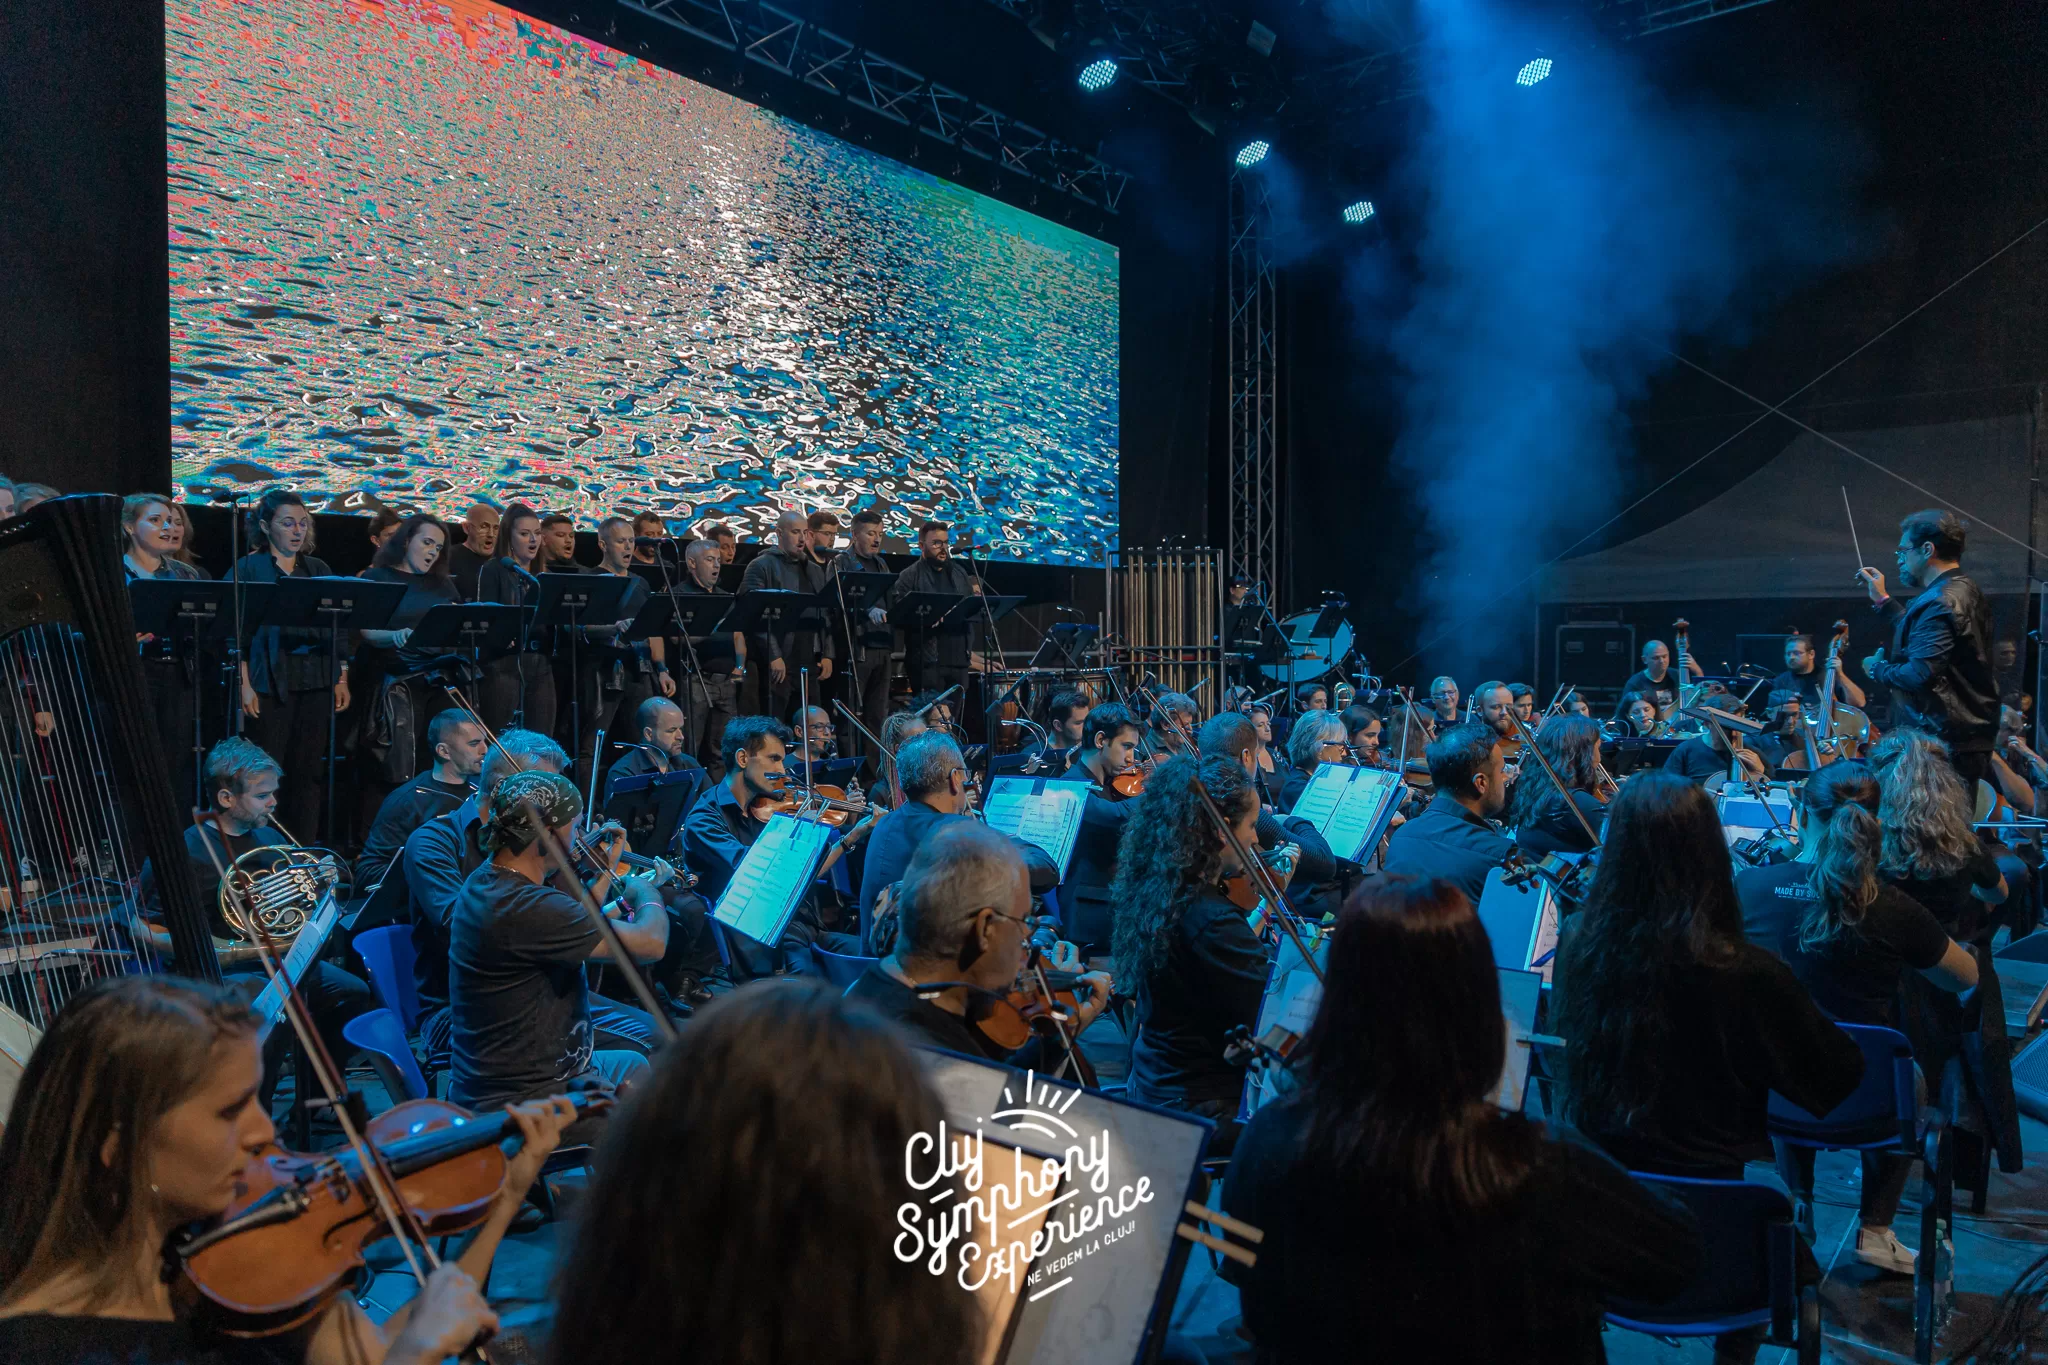 Cluj Symphony Experience orchestra